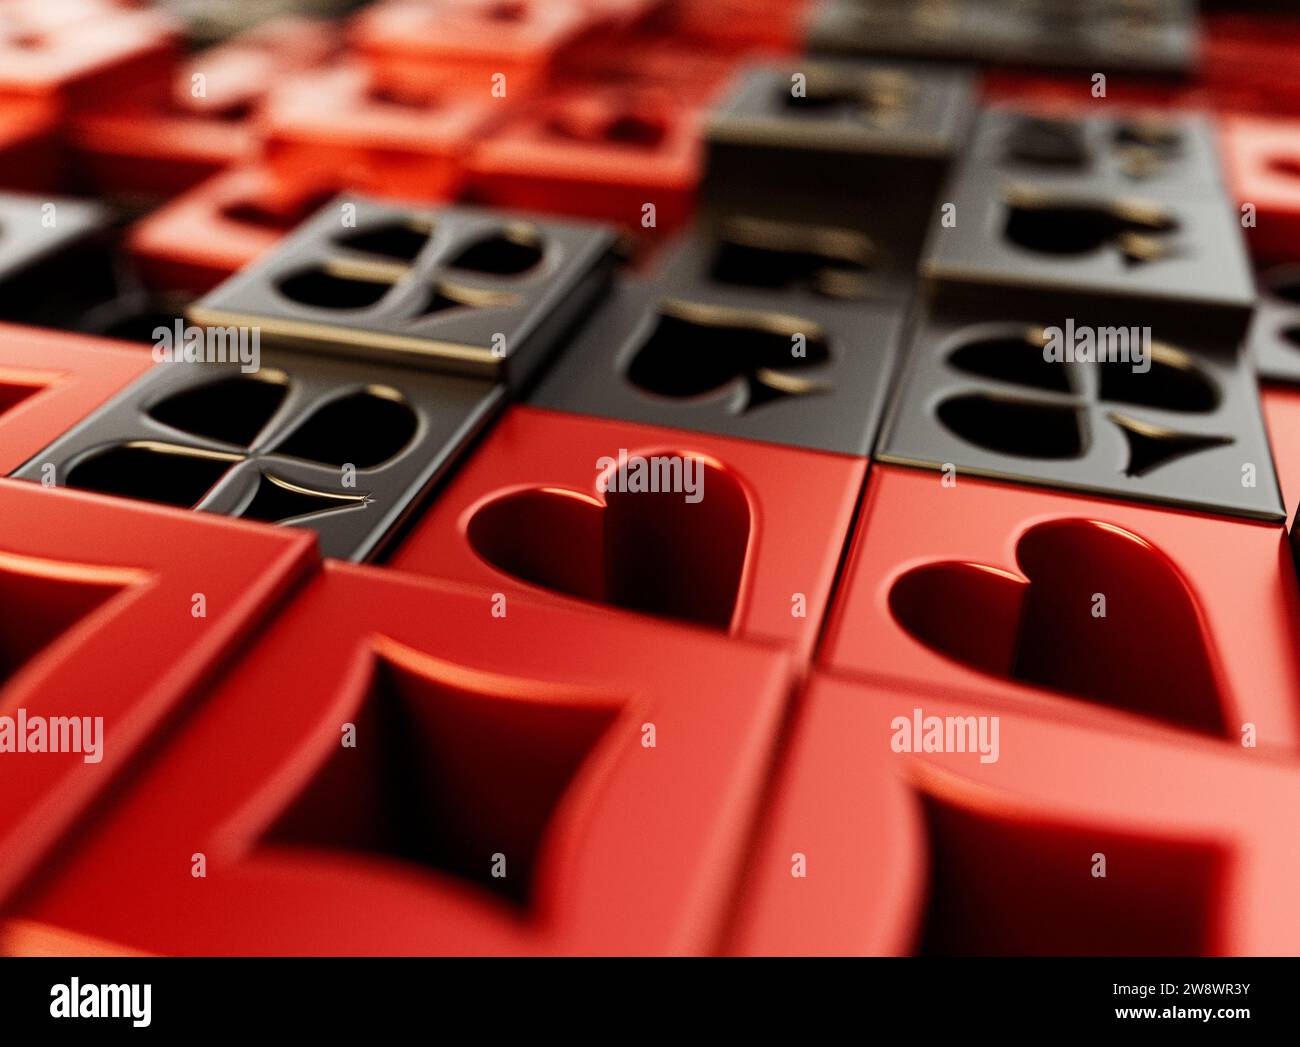 An extruded array of black and red casino card heart, diamond, spade, and club symbols fon a falt surface - 3D render Stock Photo